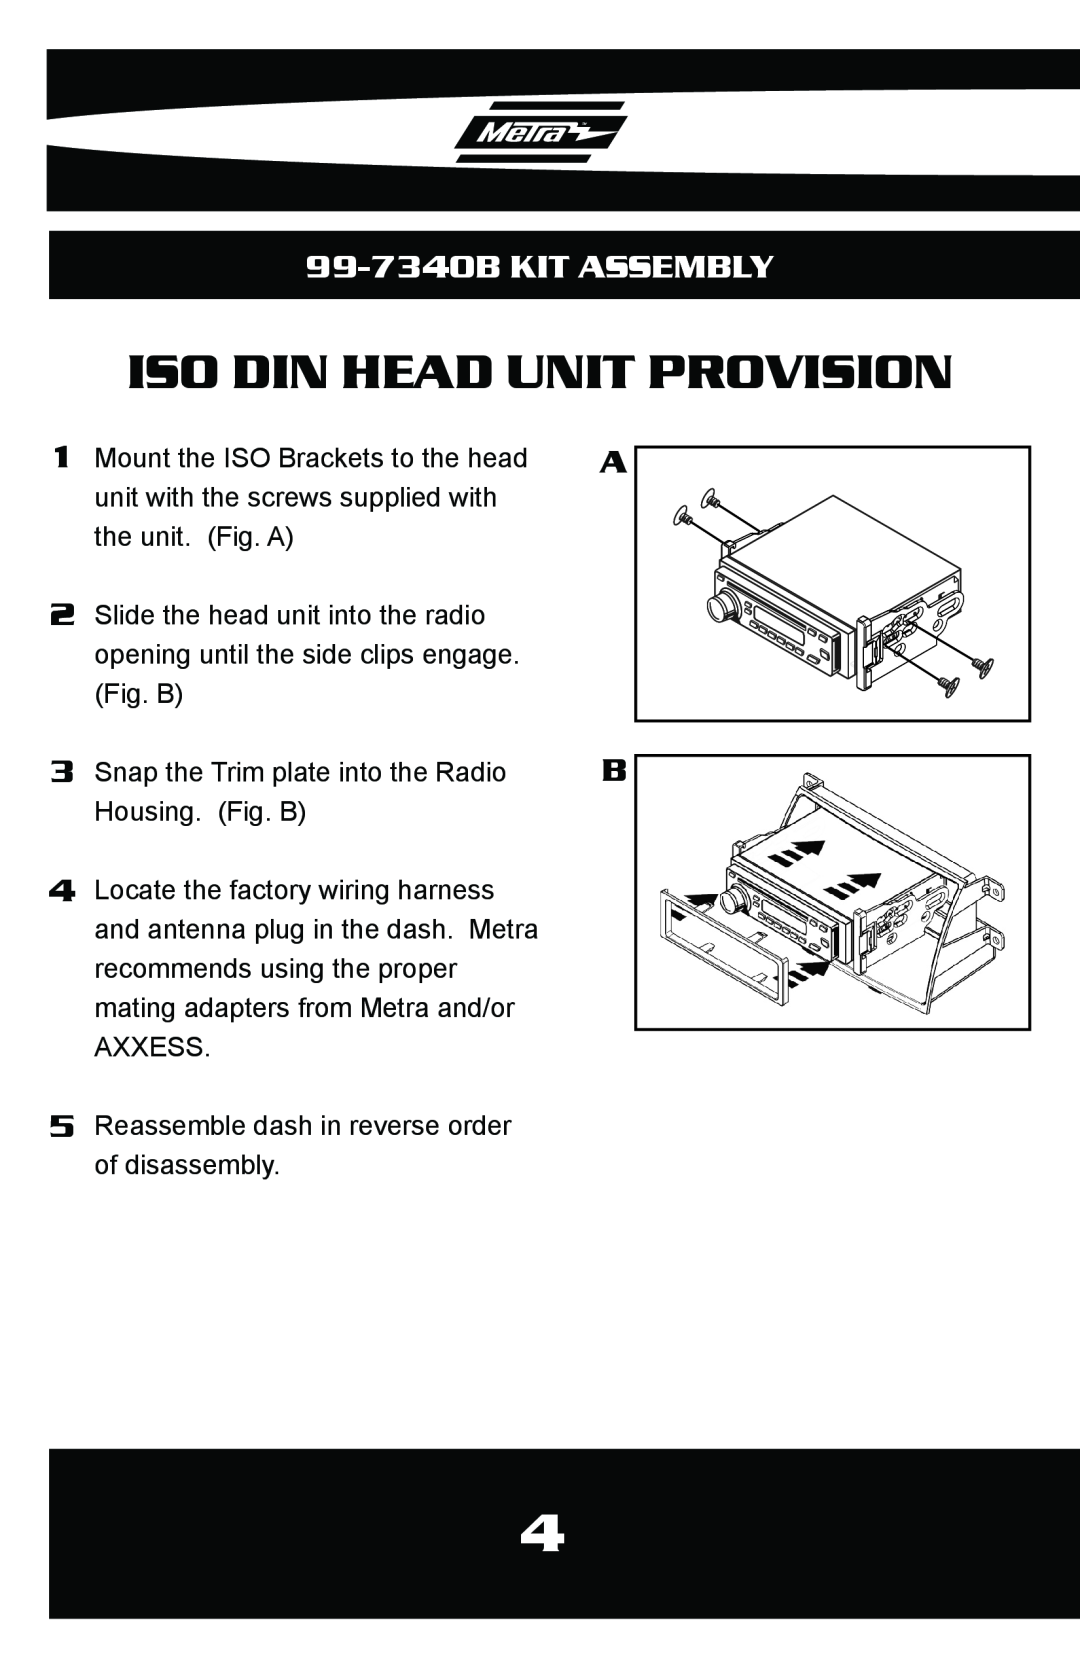 Metra Electronics installation instructions Iso Din Head Unit Provision, 99-7340B KIT ASSEMBLY 